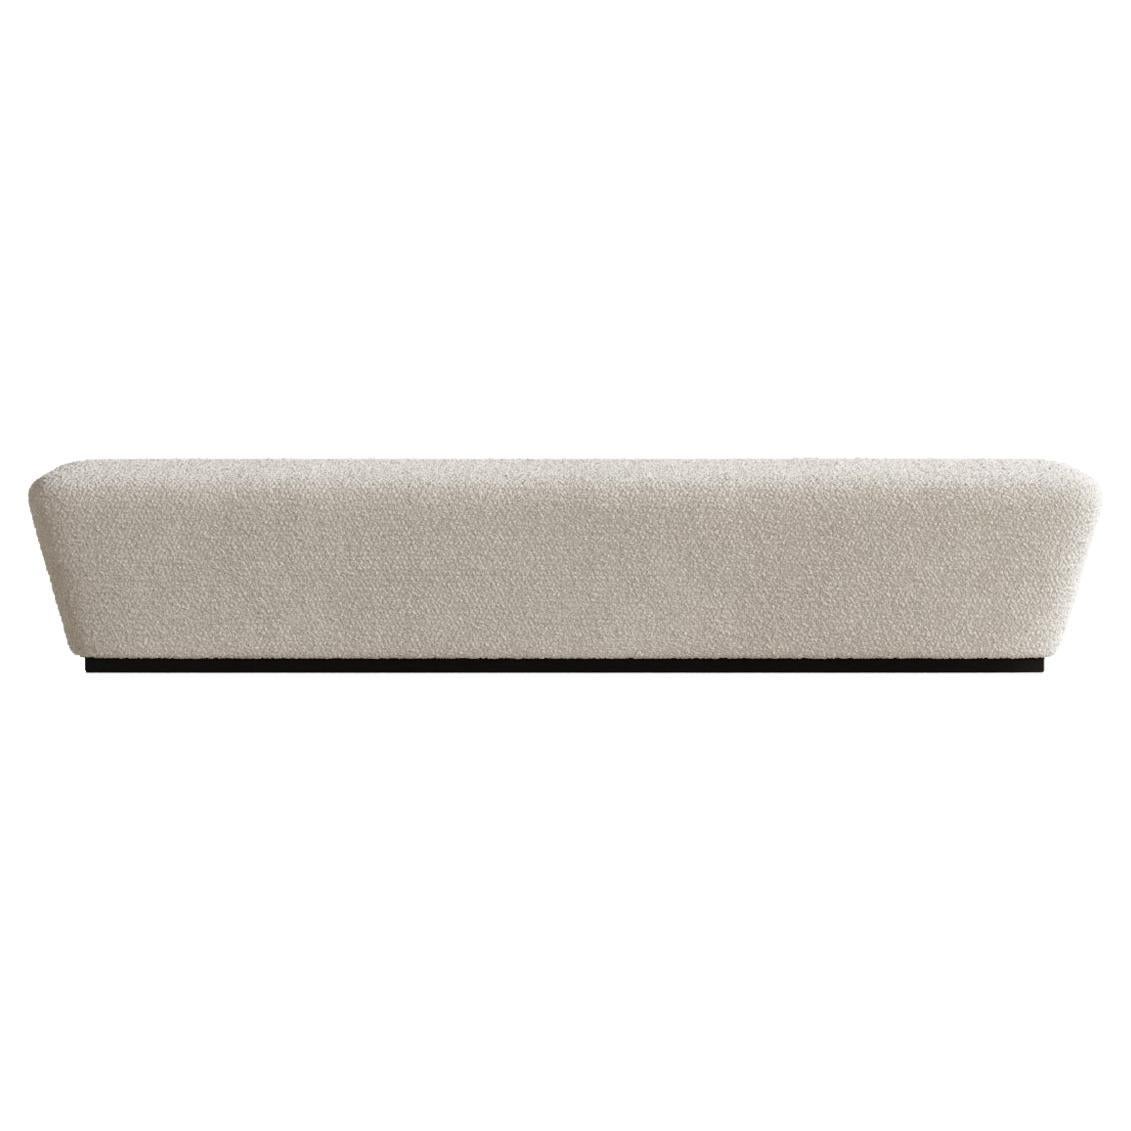 White Memory Bench by Plyus Design